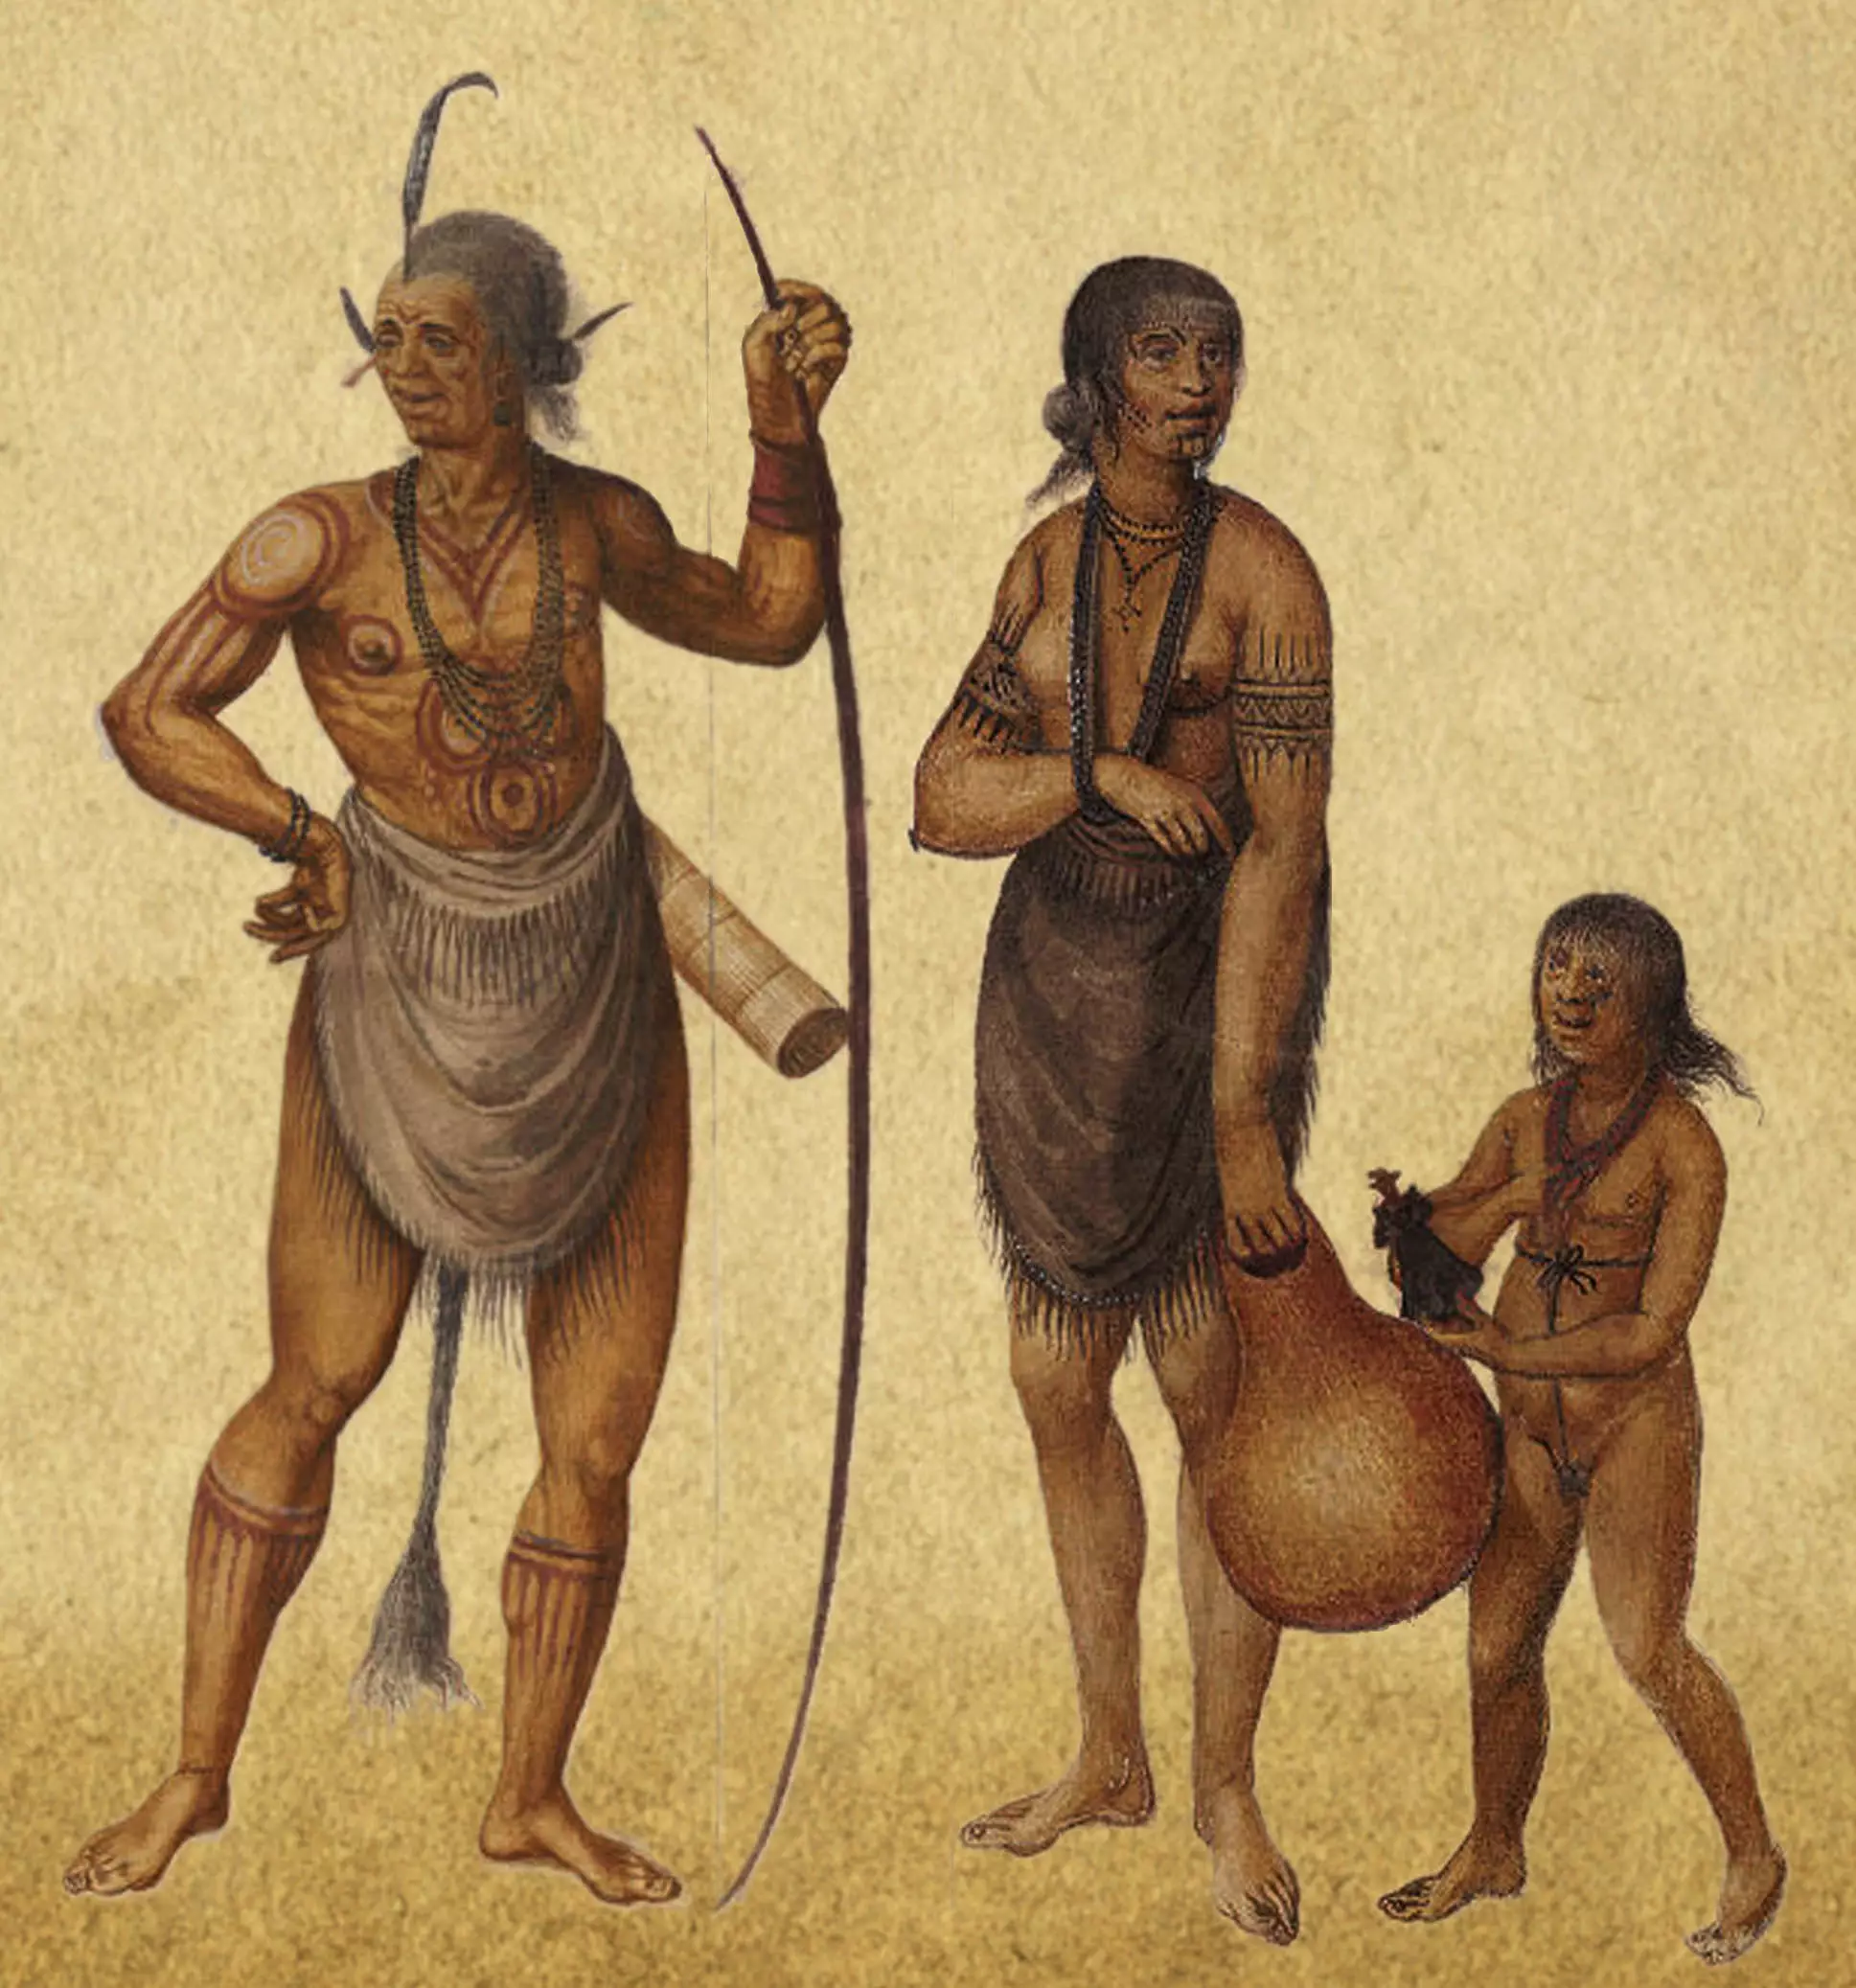 Illustrated depiction of a Kickapoo man, woman, and child. The man is holding a bow, the woman holding a type of pottery, and the child is holding what appears to be a doll.